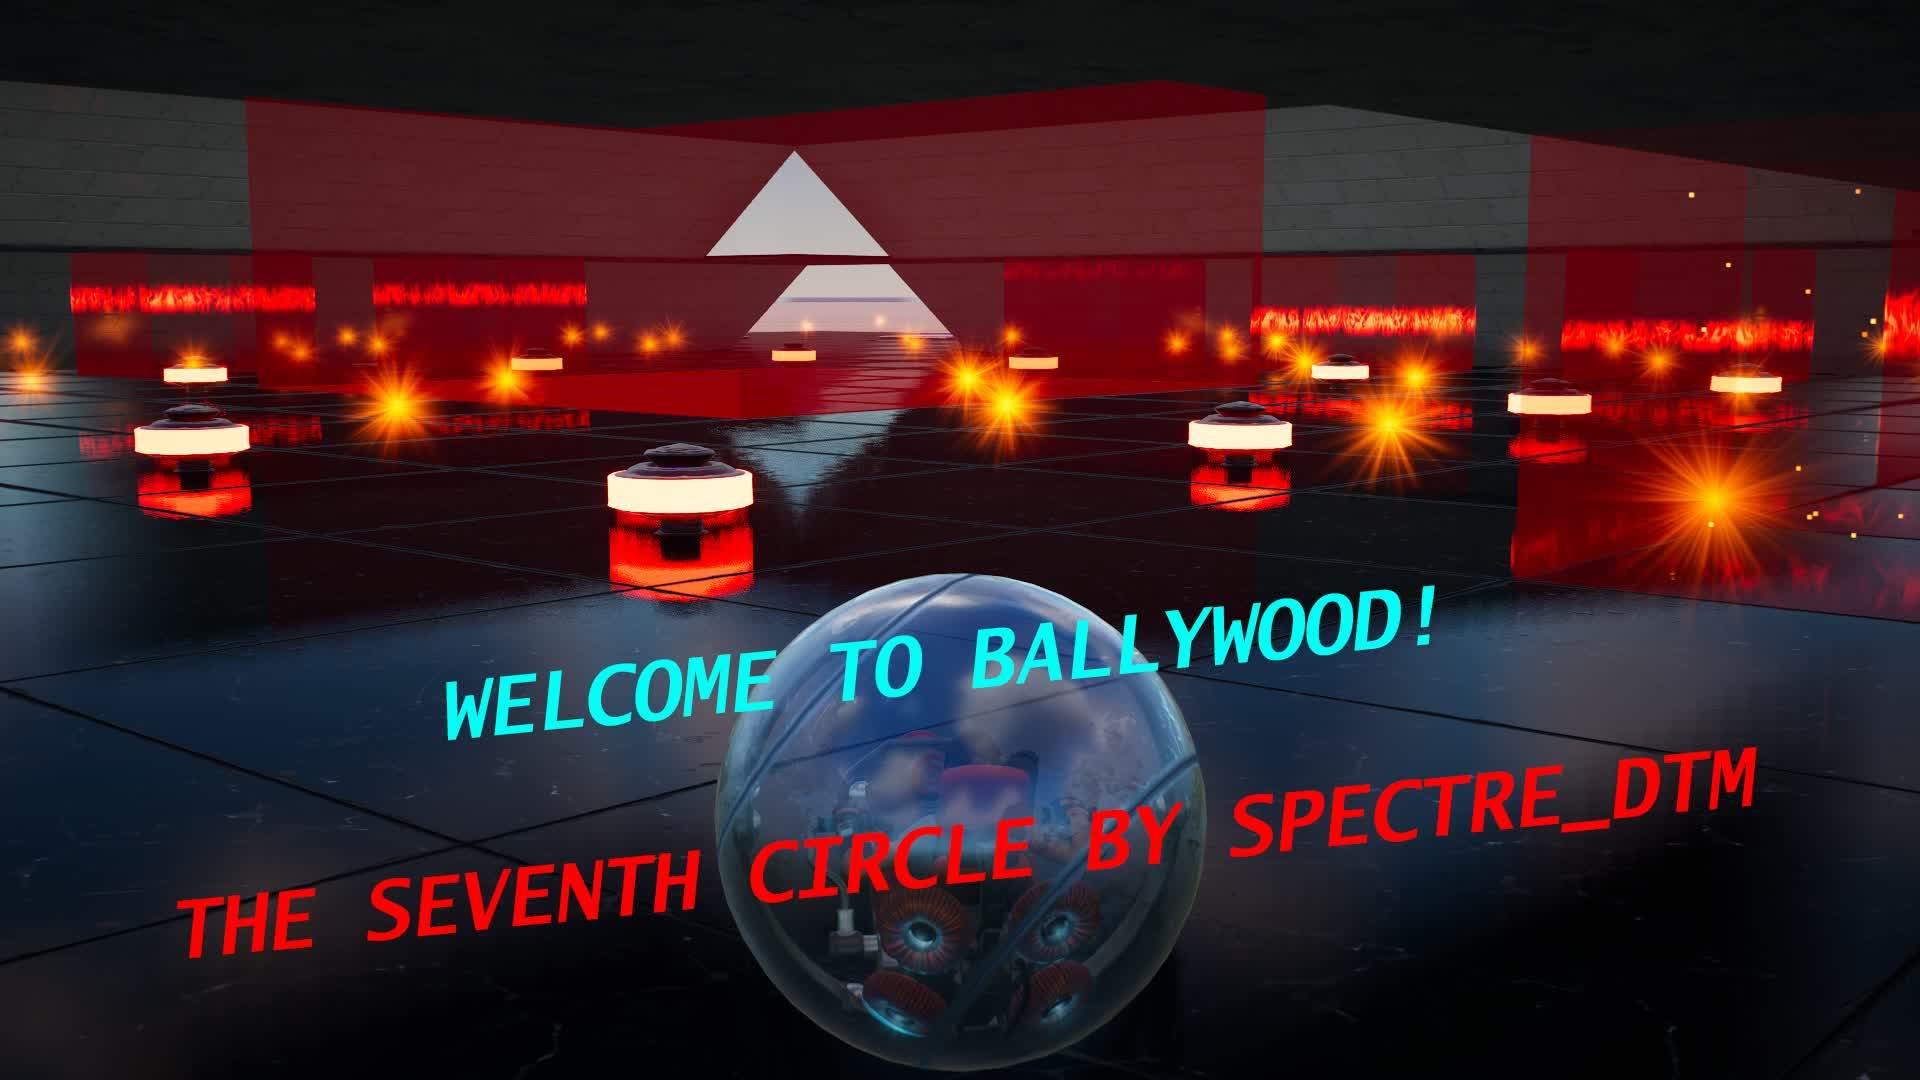 The Seventh Circle (of Ballywood)